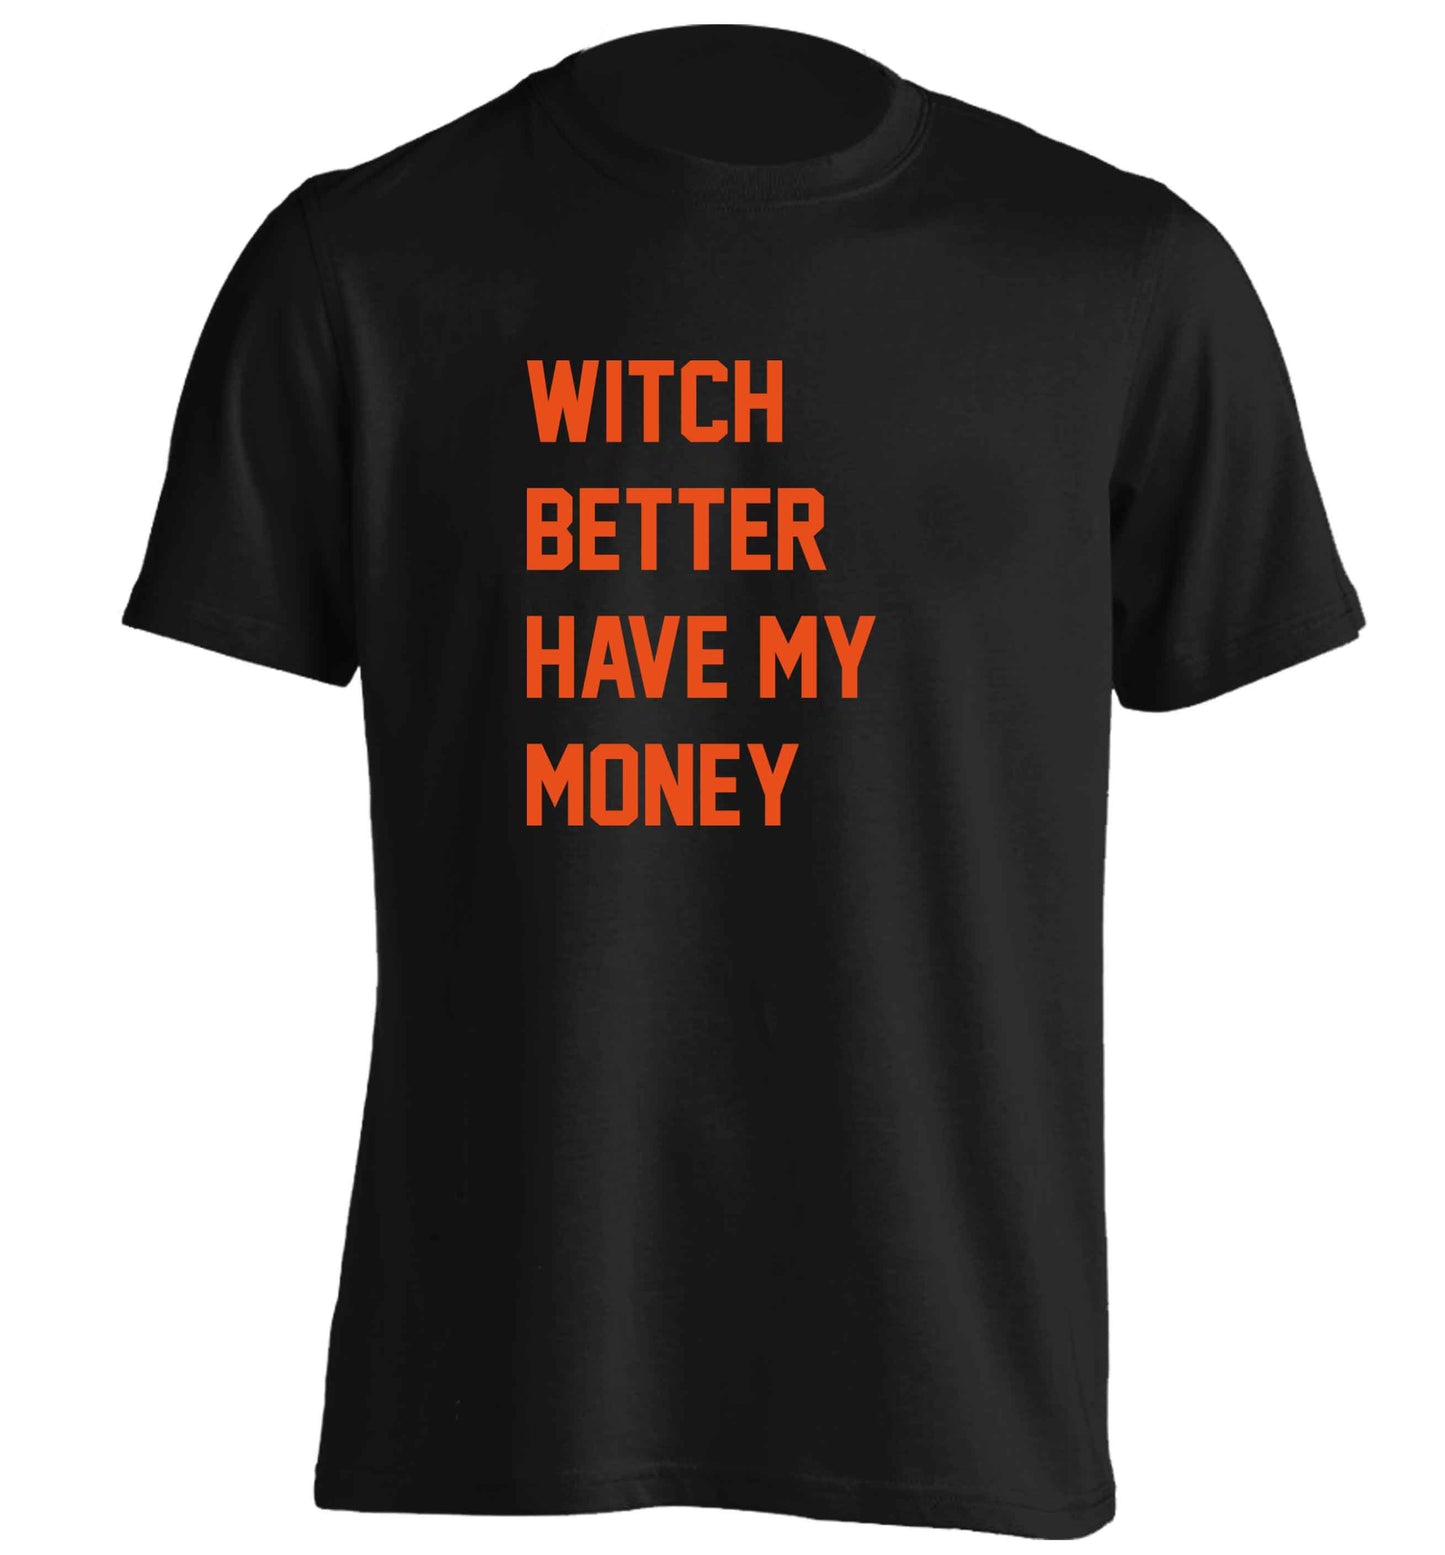 Witch better have my money adults unisex black Tshirt 2XL